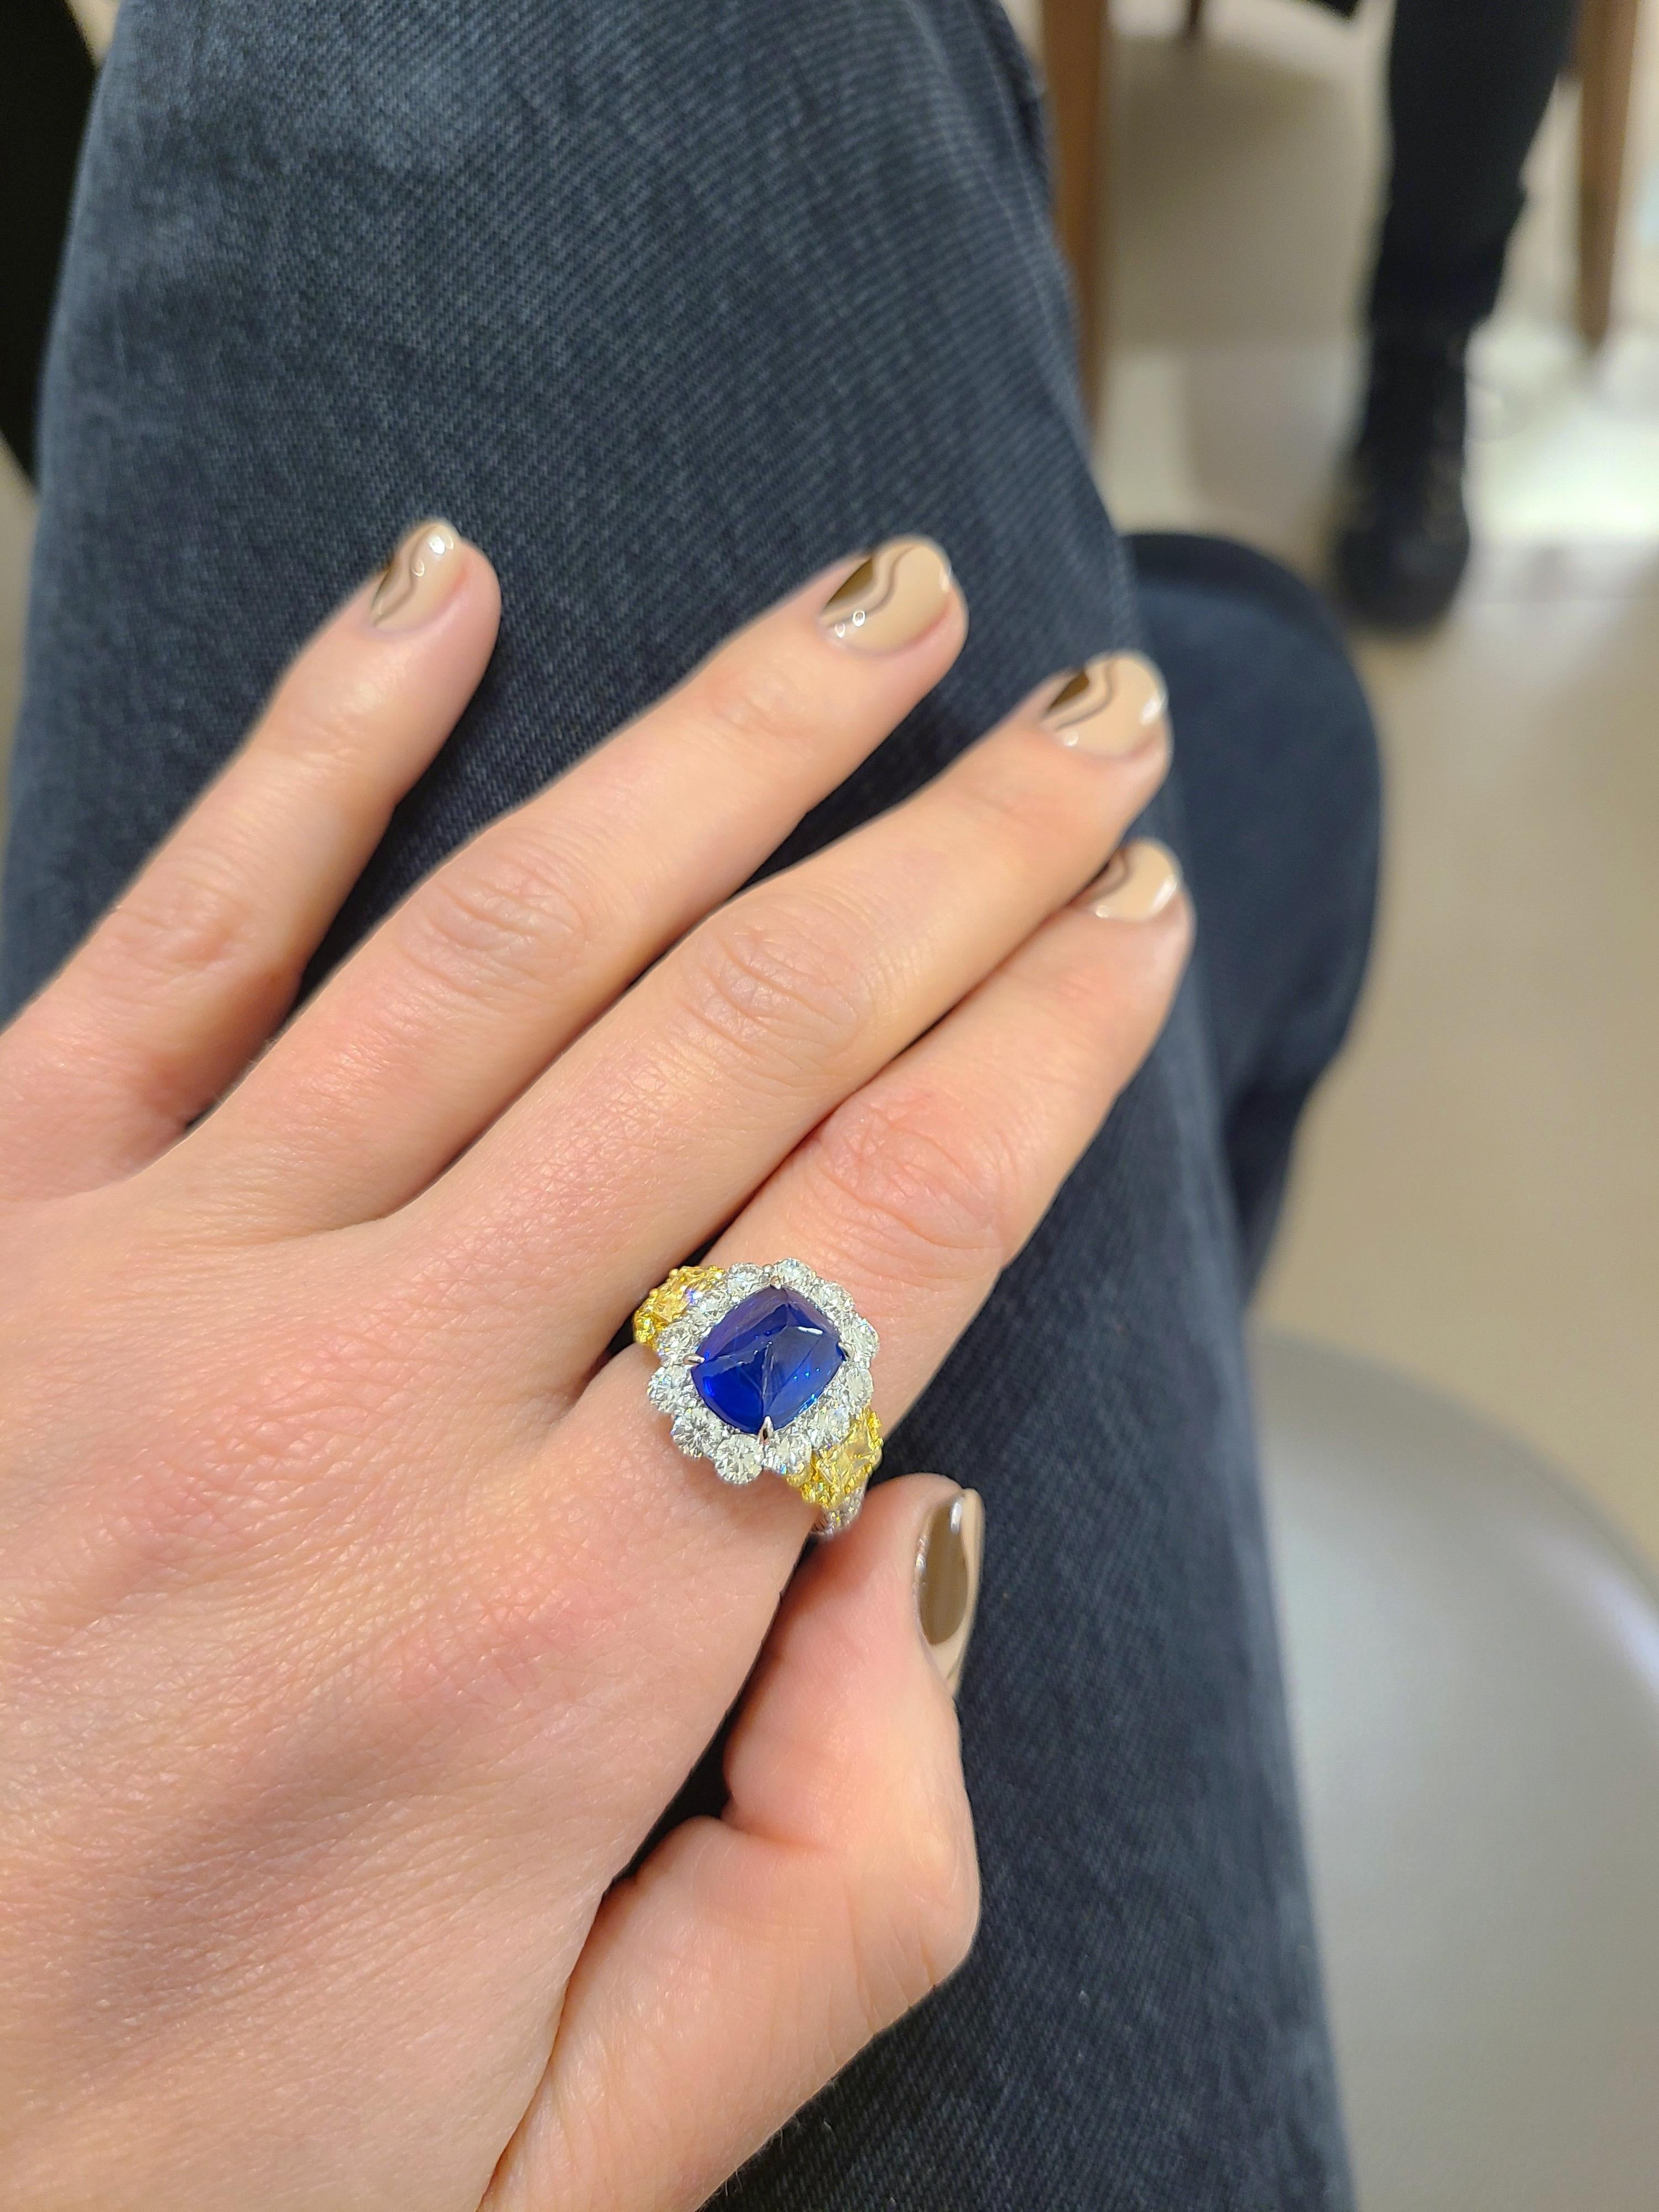 This exquisite center stone platinum ring features a sugarloaf cabochon blue sapphire as the main attraction. Round white brilliant diamonds surround the sapphire . Set on either side are fancy yellow trapezoid side stones which are bordered in